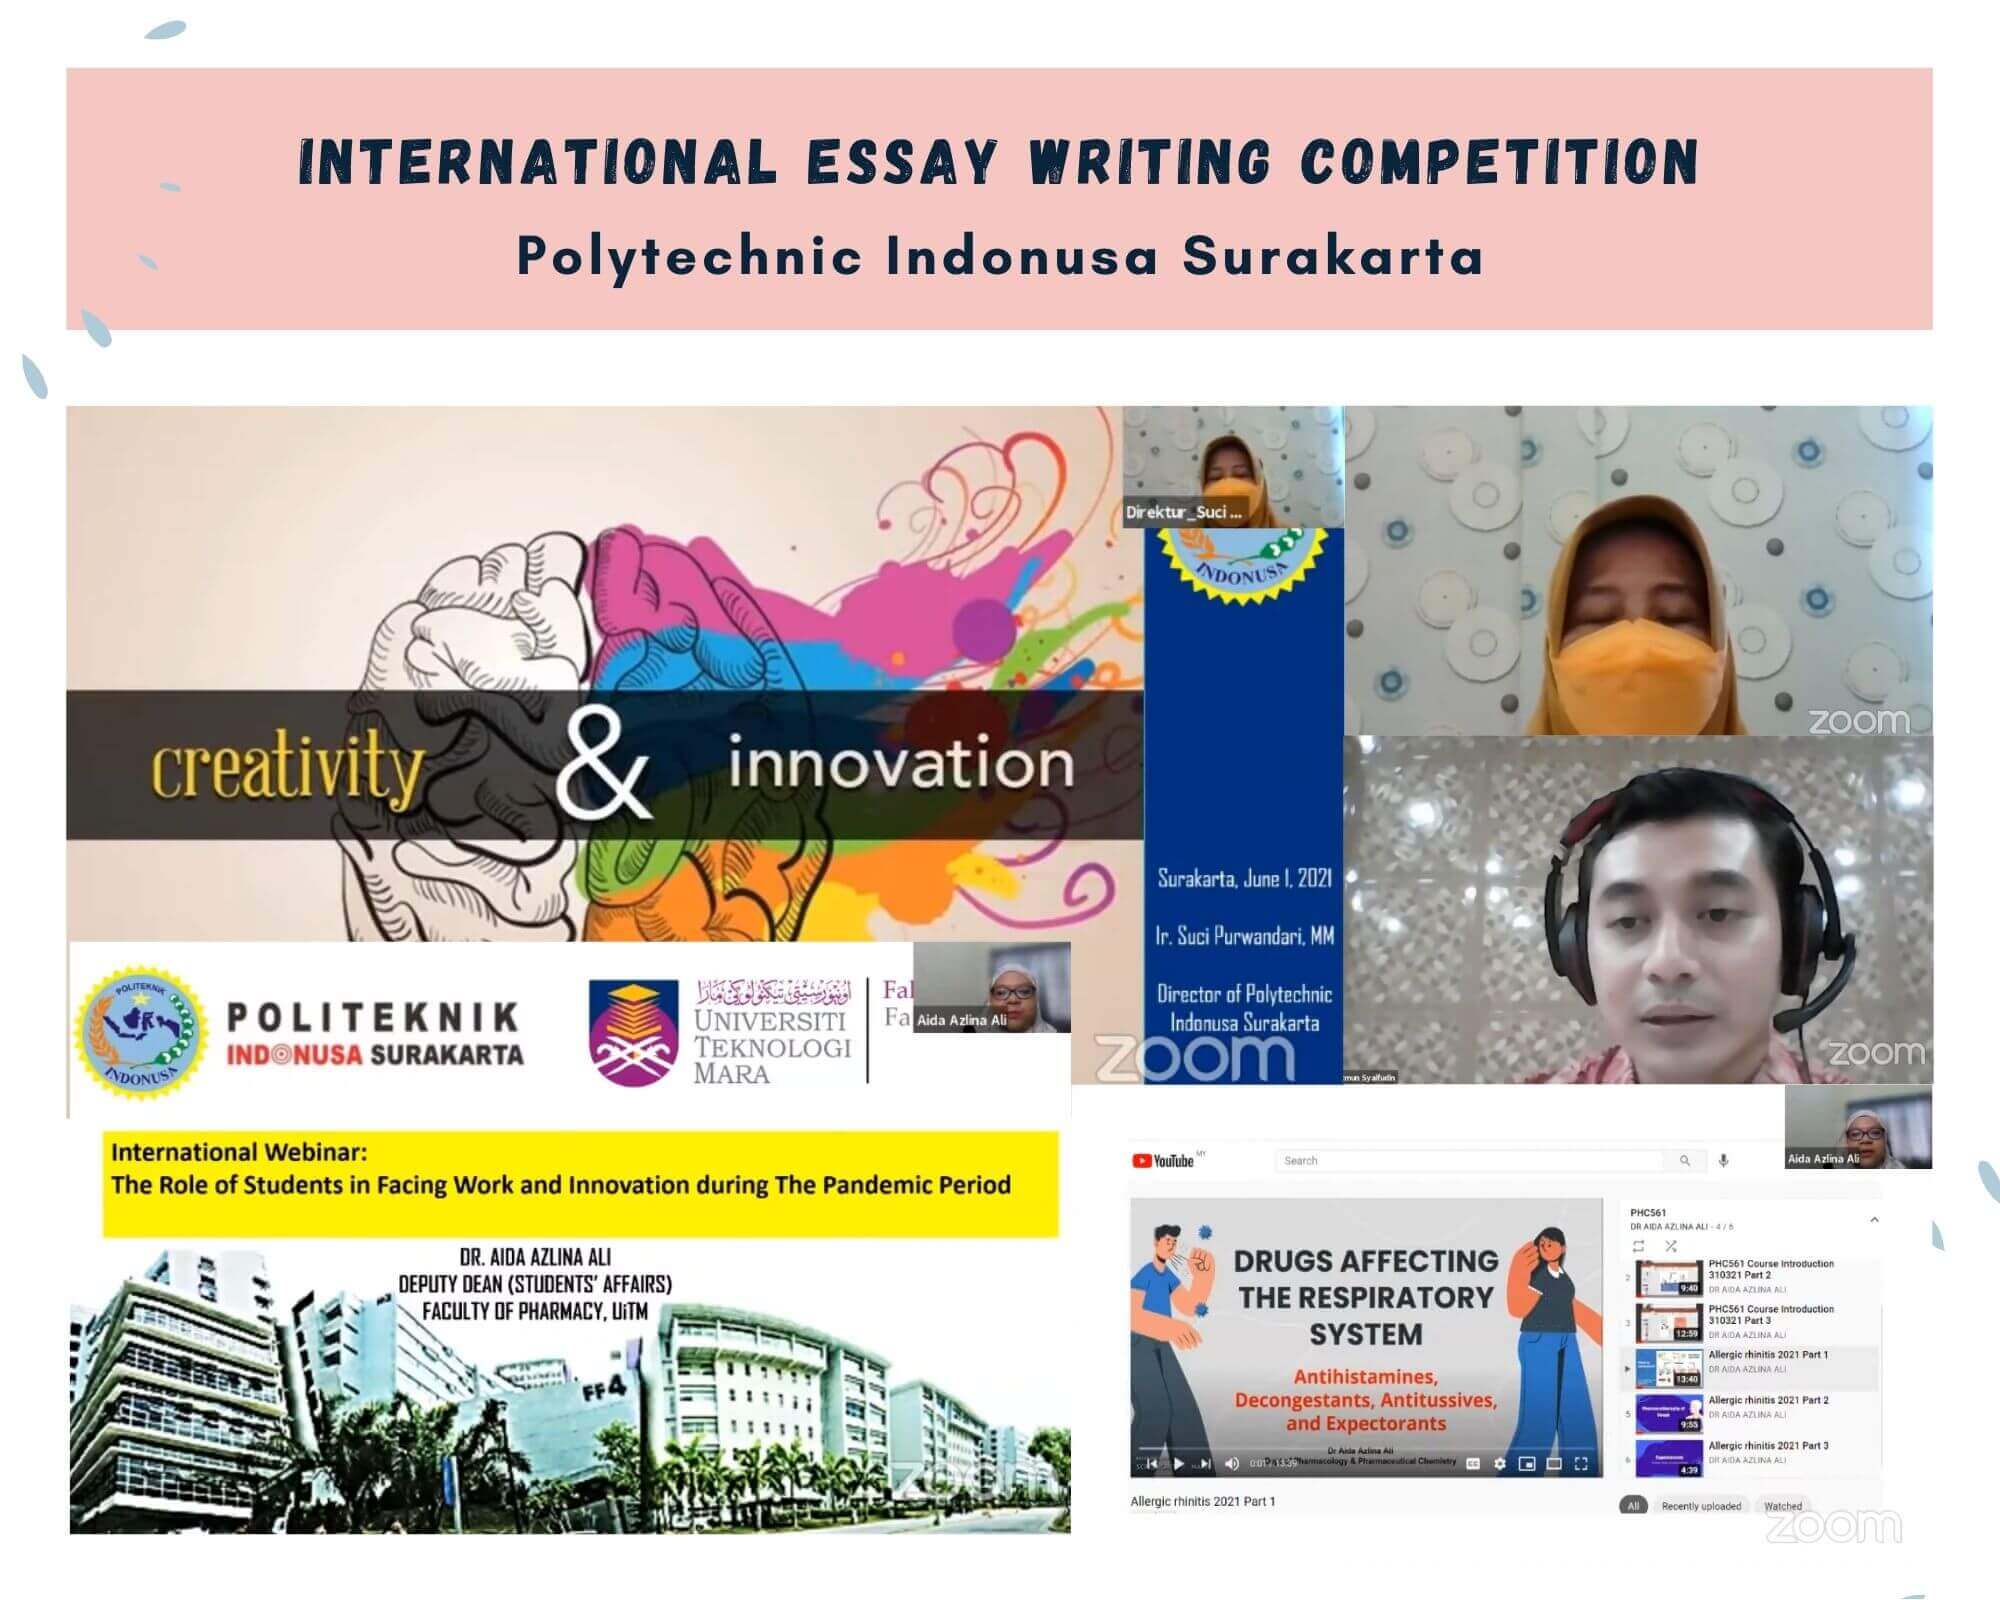 international essay writing competition 2021